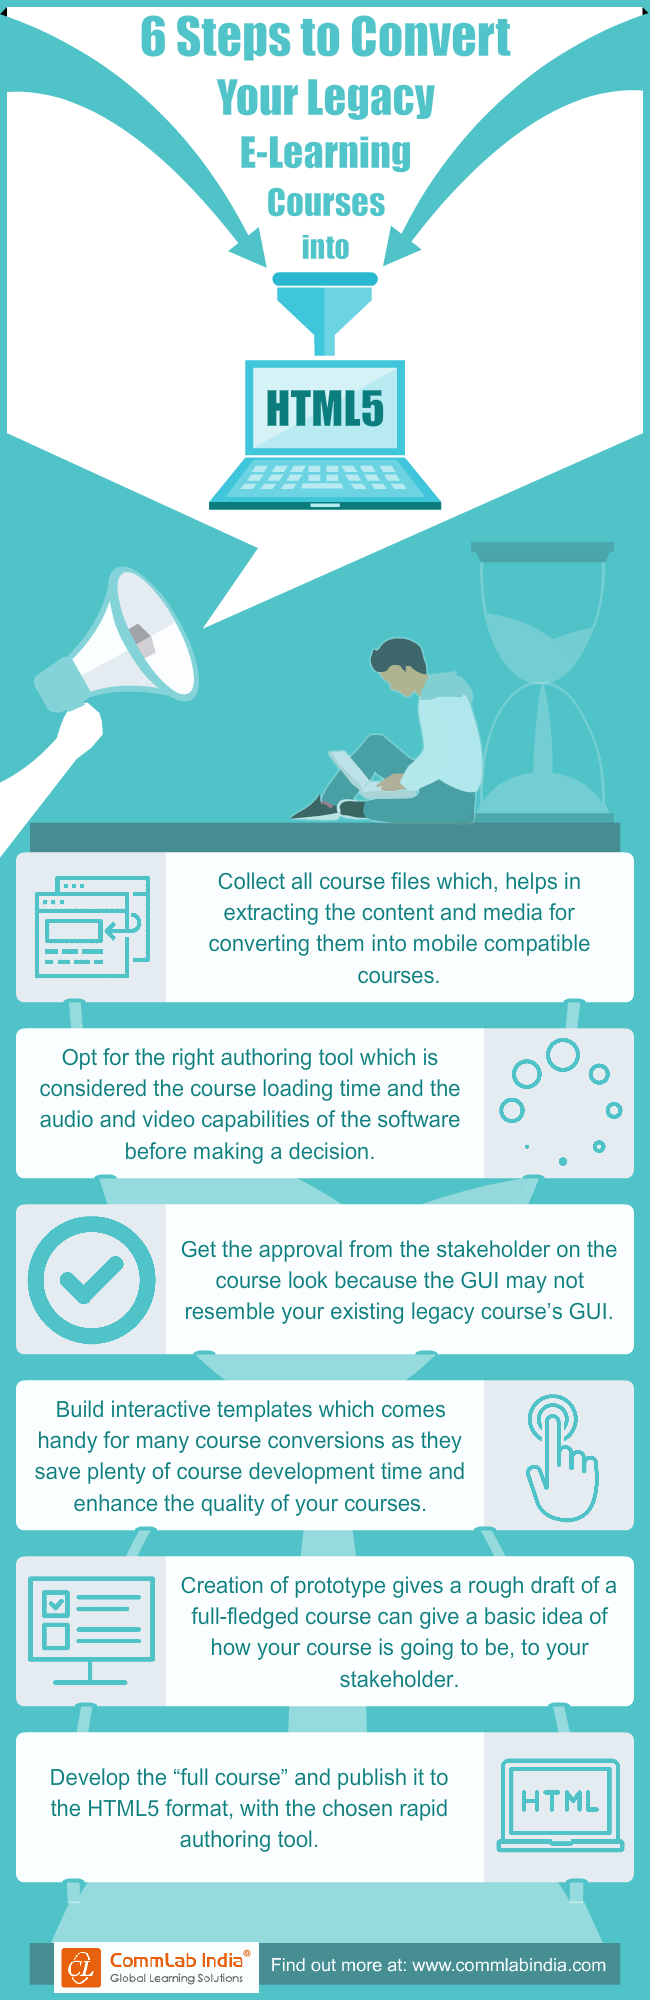 6 Steps to Convert Your Legacy E-learning Courses to HTML5 [Infographic]